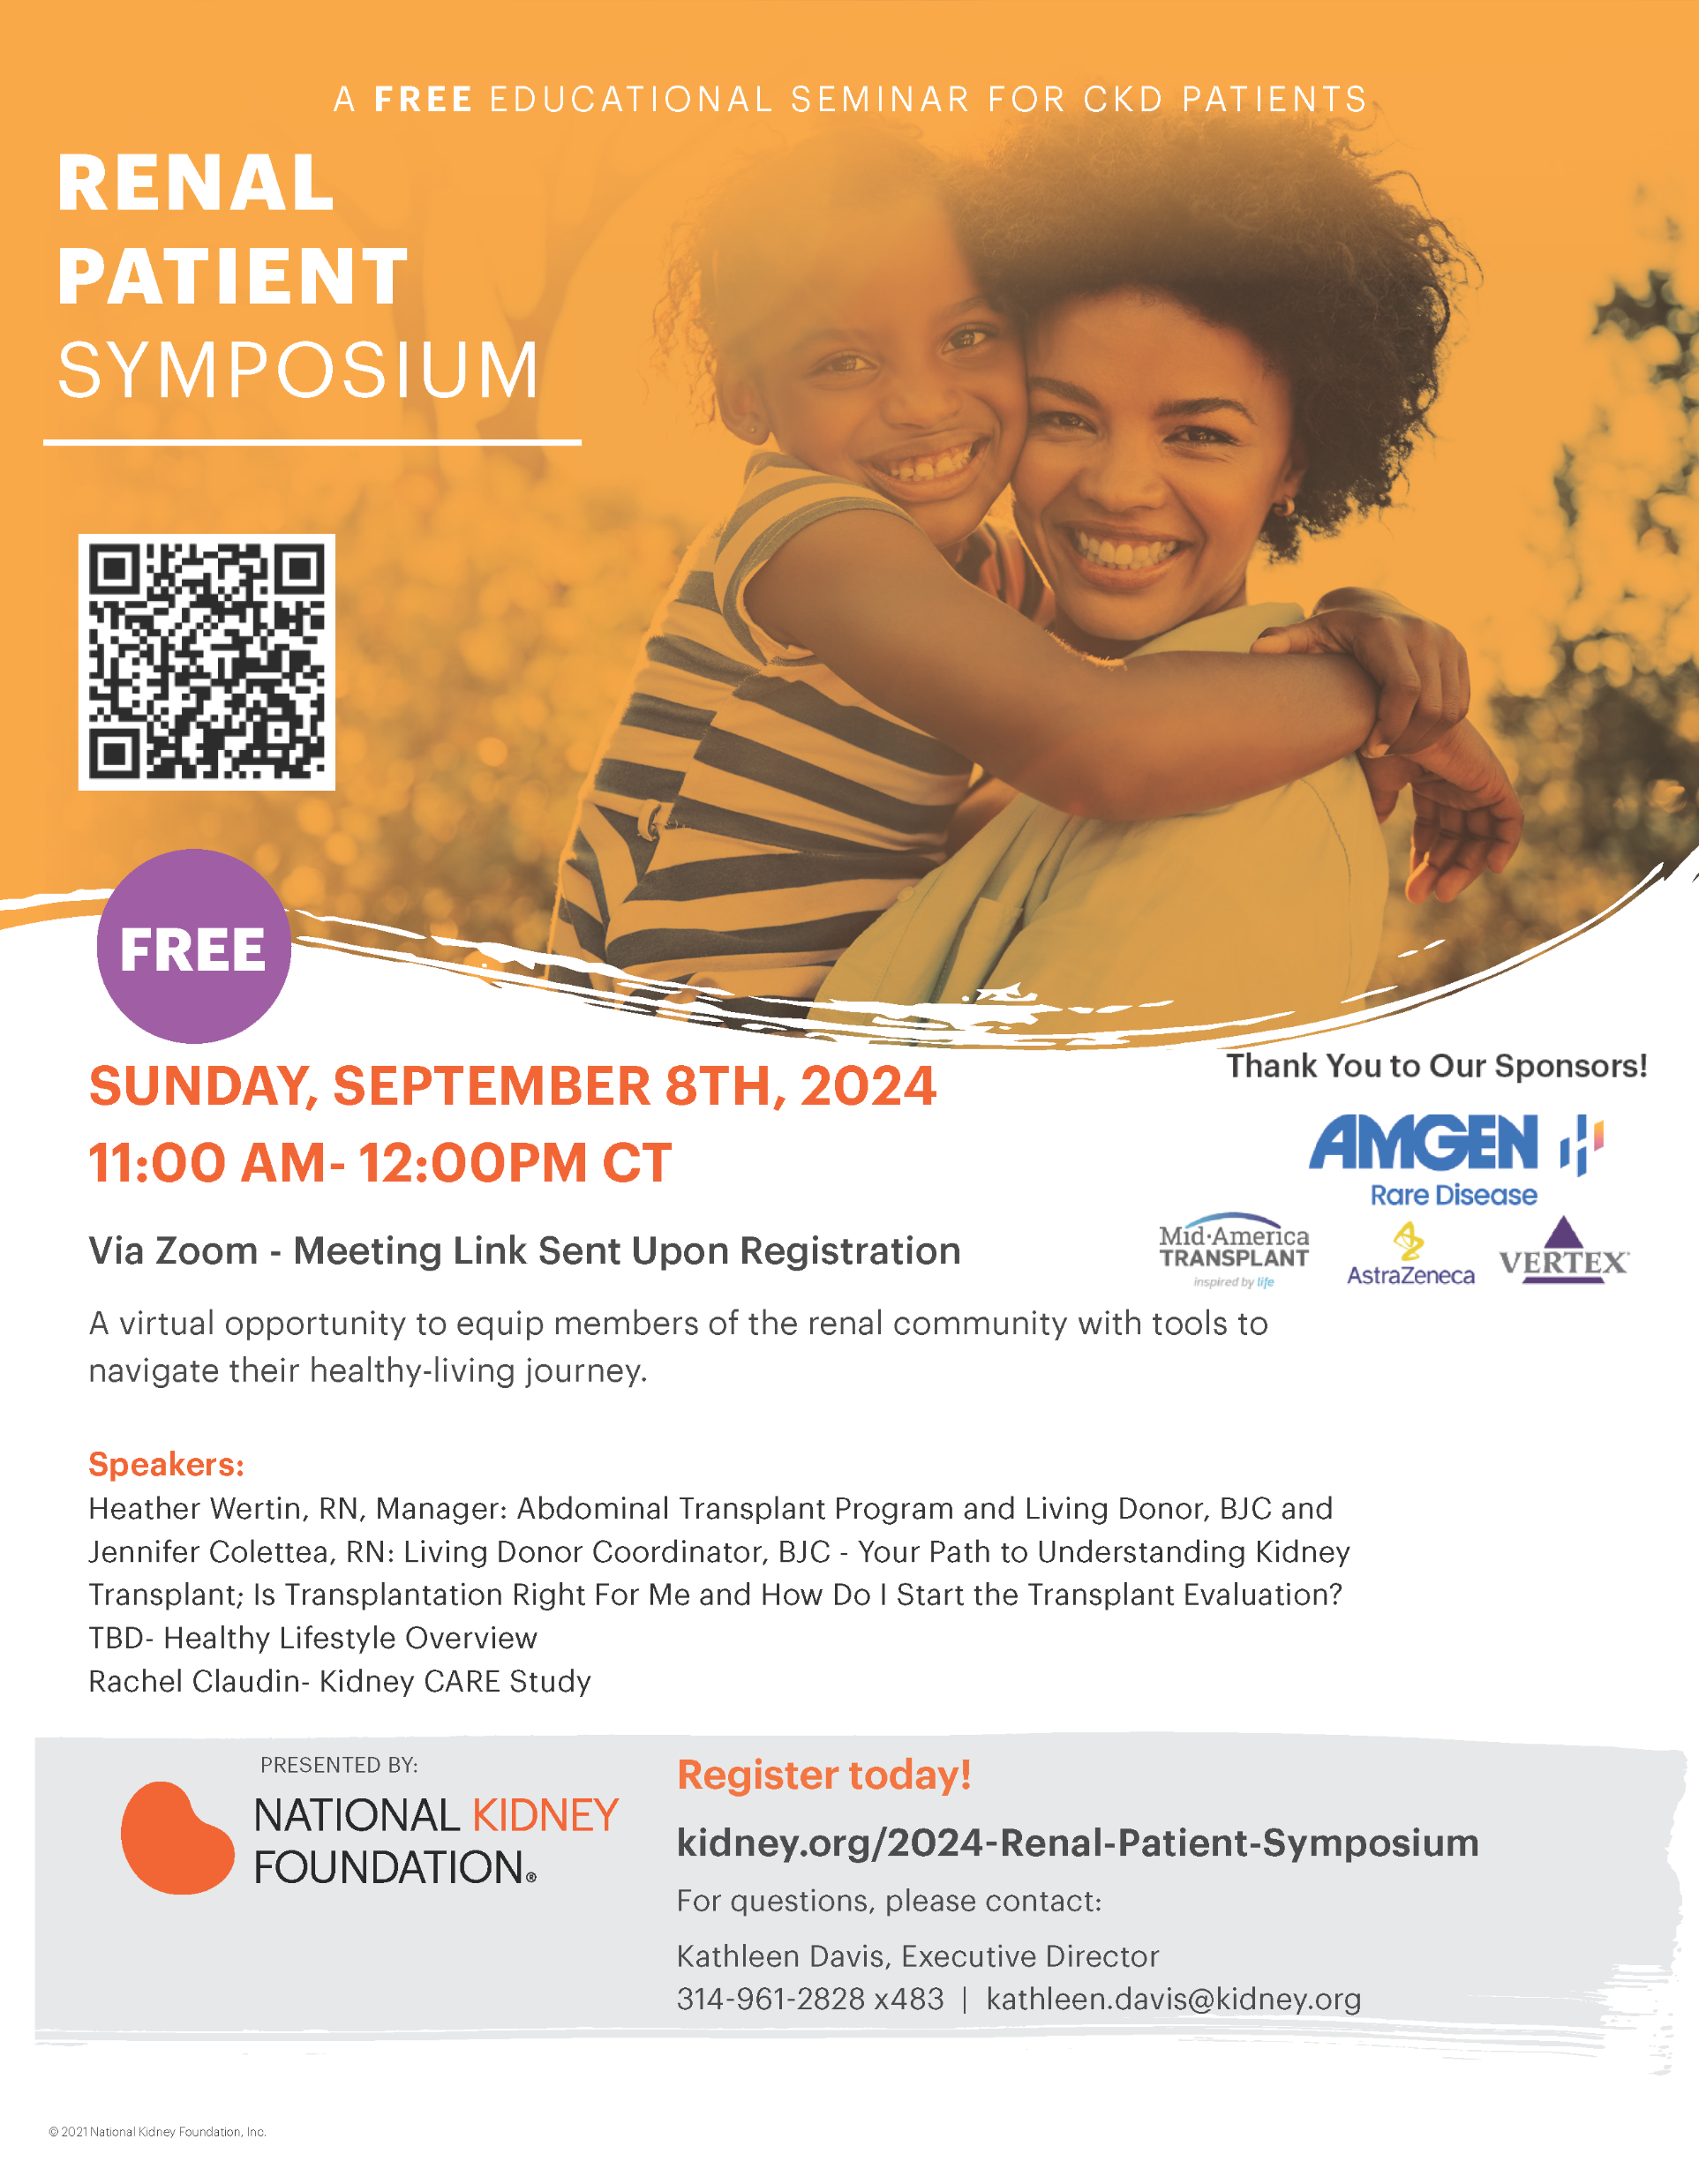 Informational brochure on the Renal Patient Symposium with photo of two people smiling.